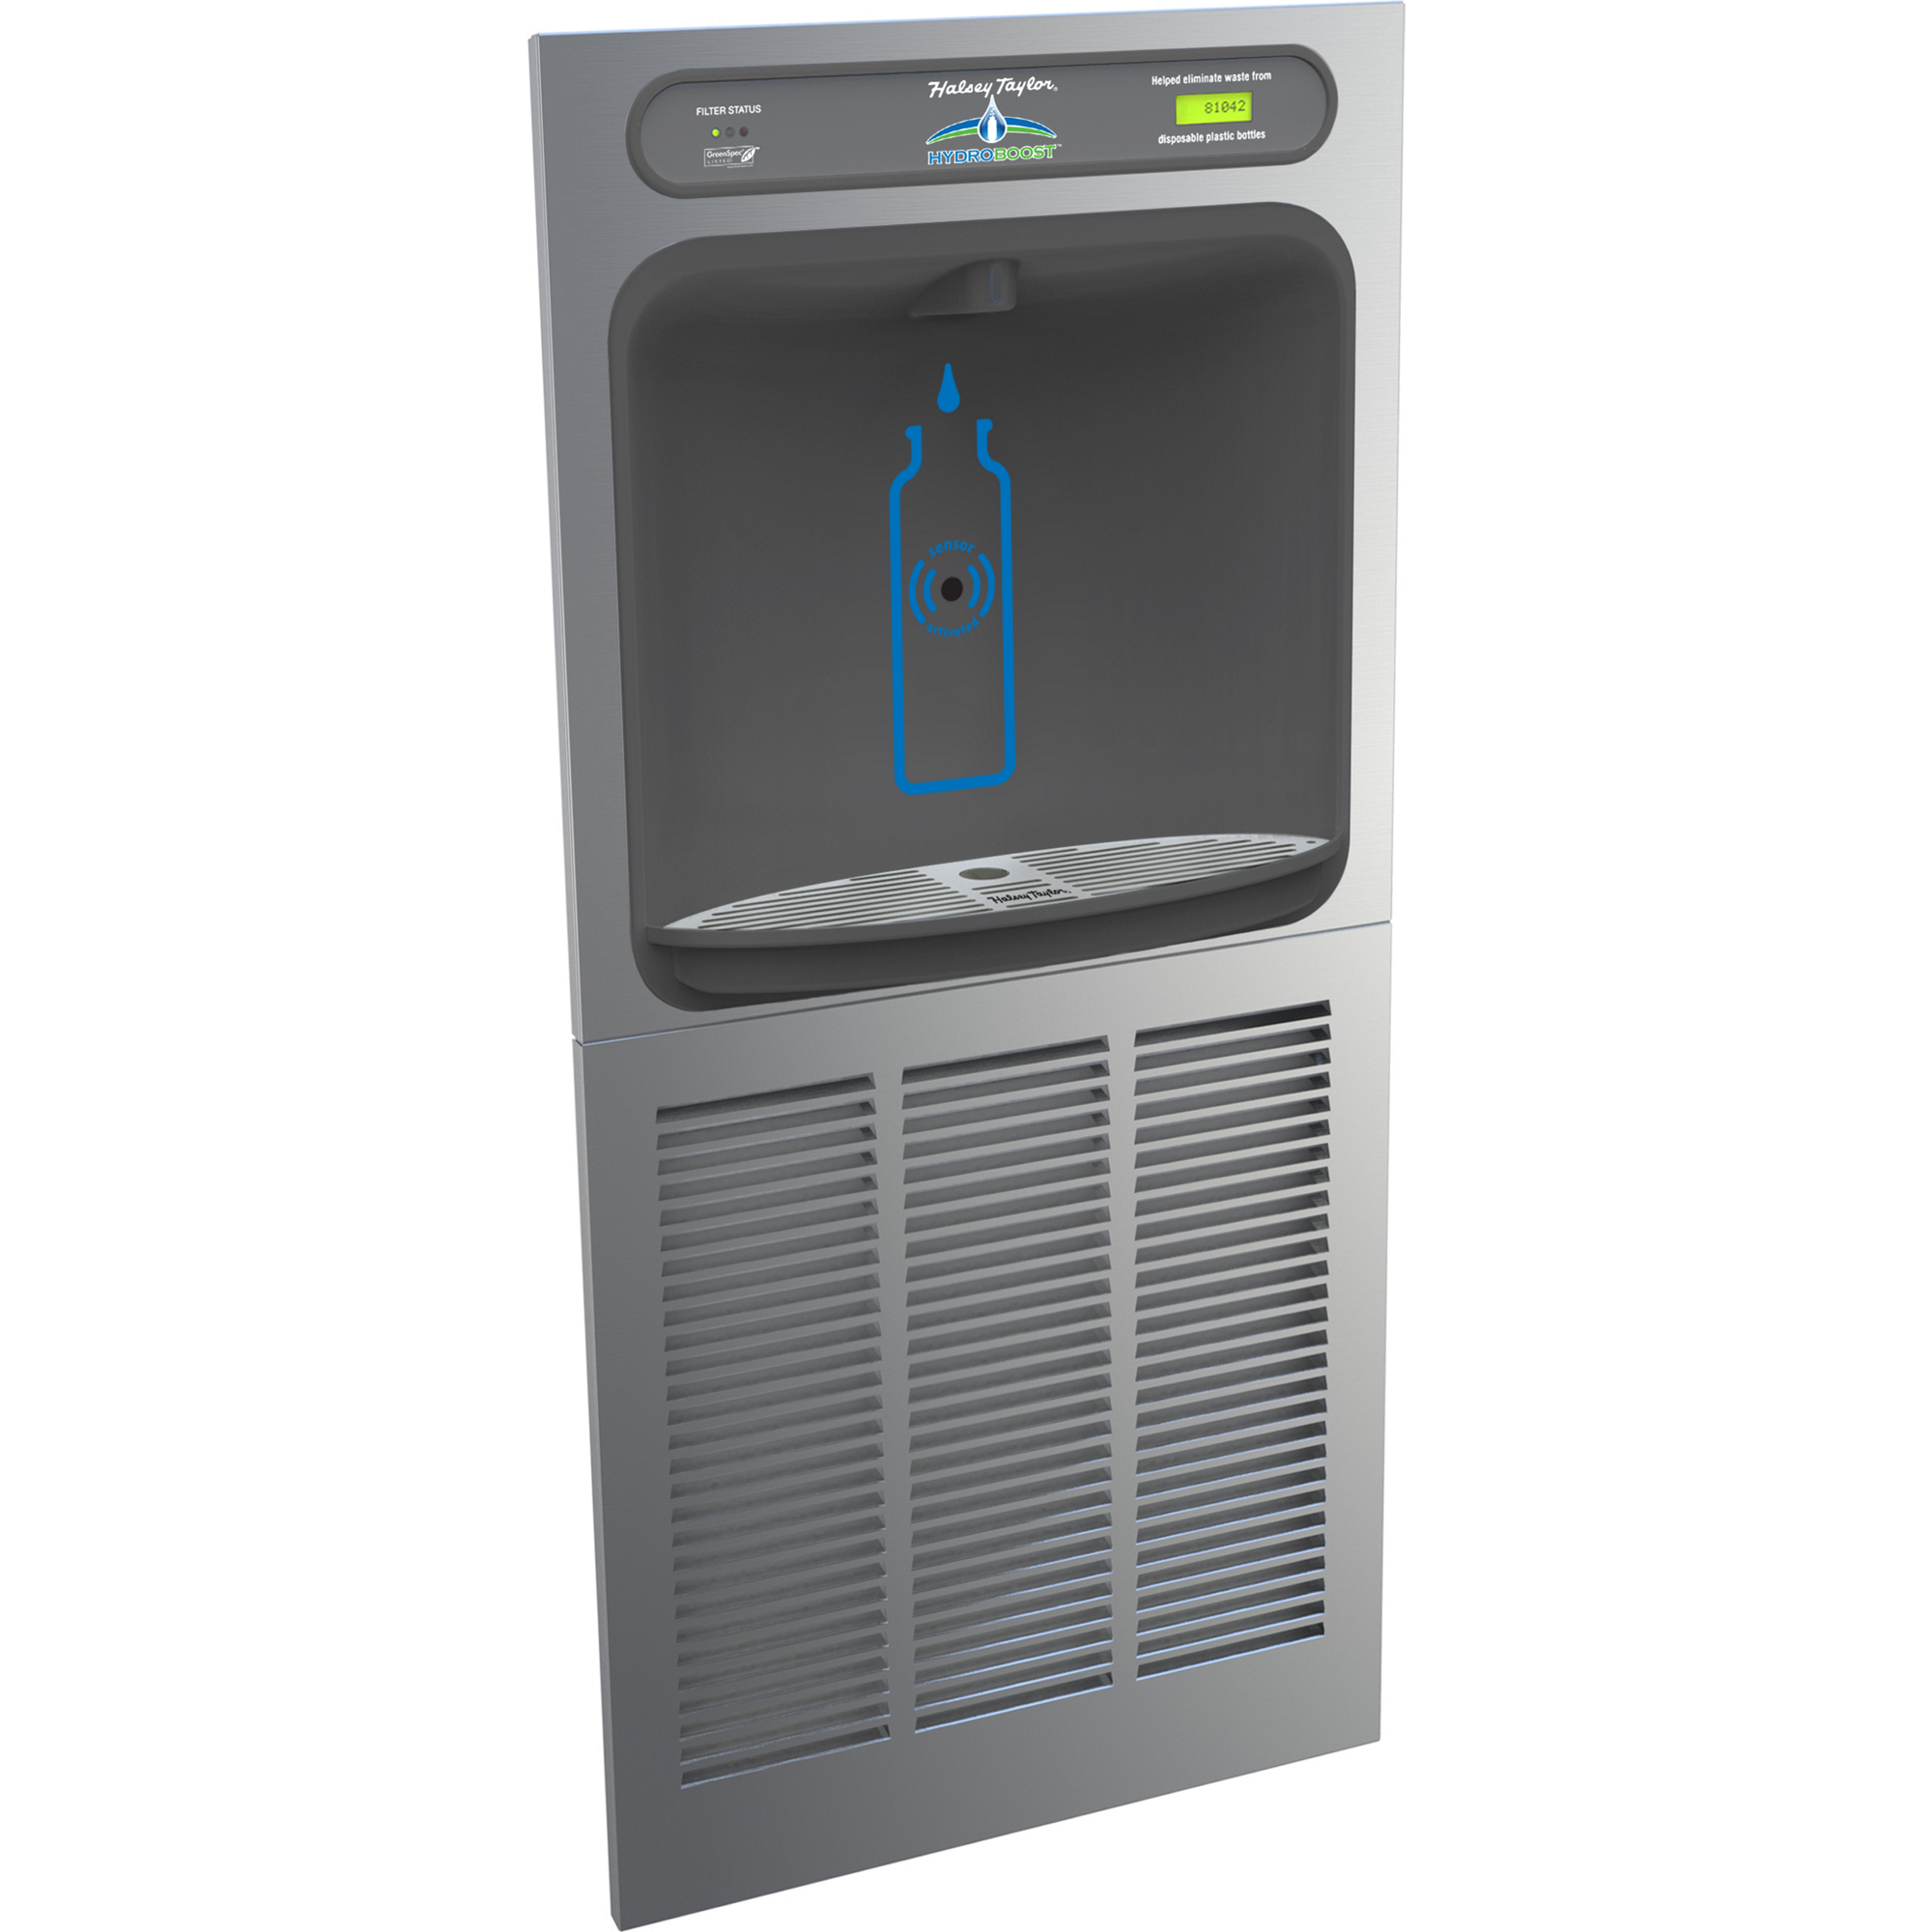 Halsey Taylor HTHBGRN8-WF | In-wall Bottle Filler | Filtered, High-efficiency chiller, Hands-free (comes with Mounting Frame)